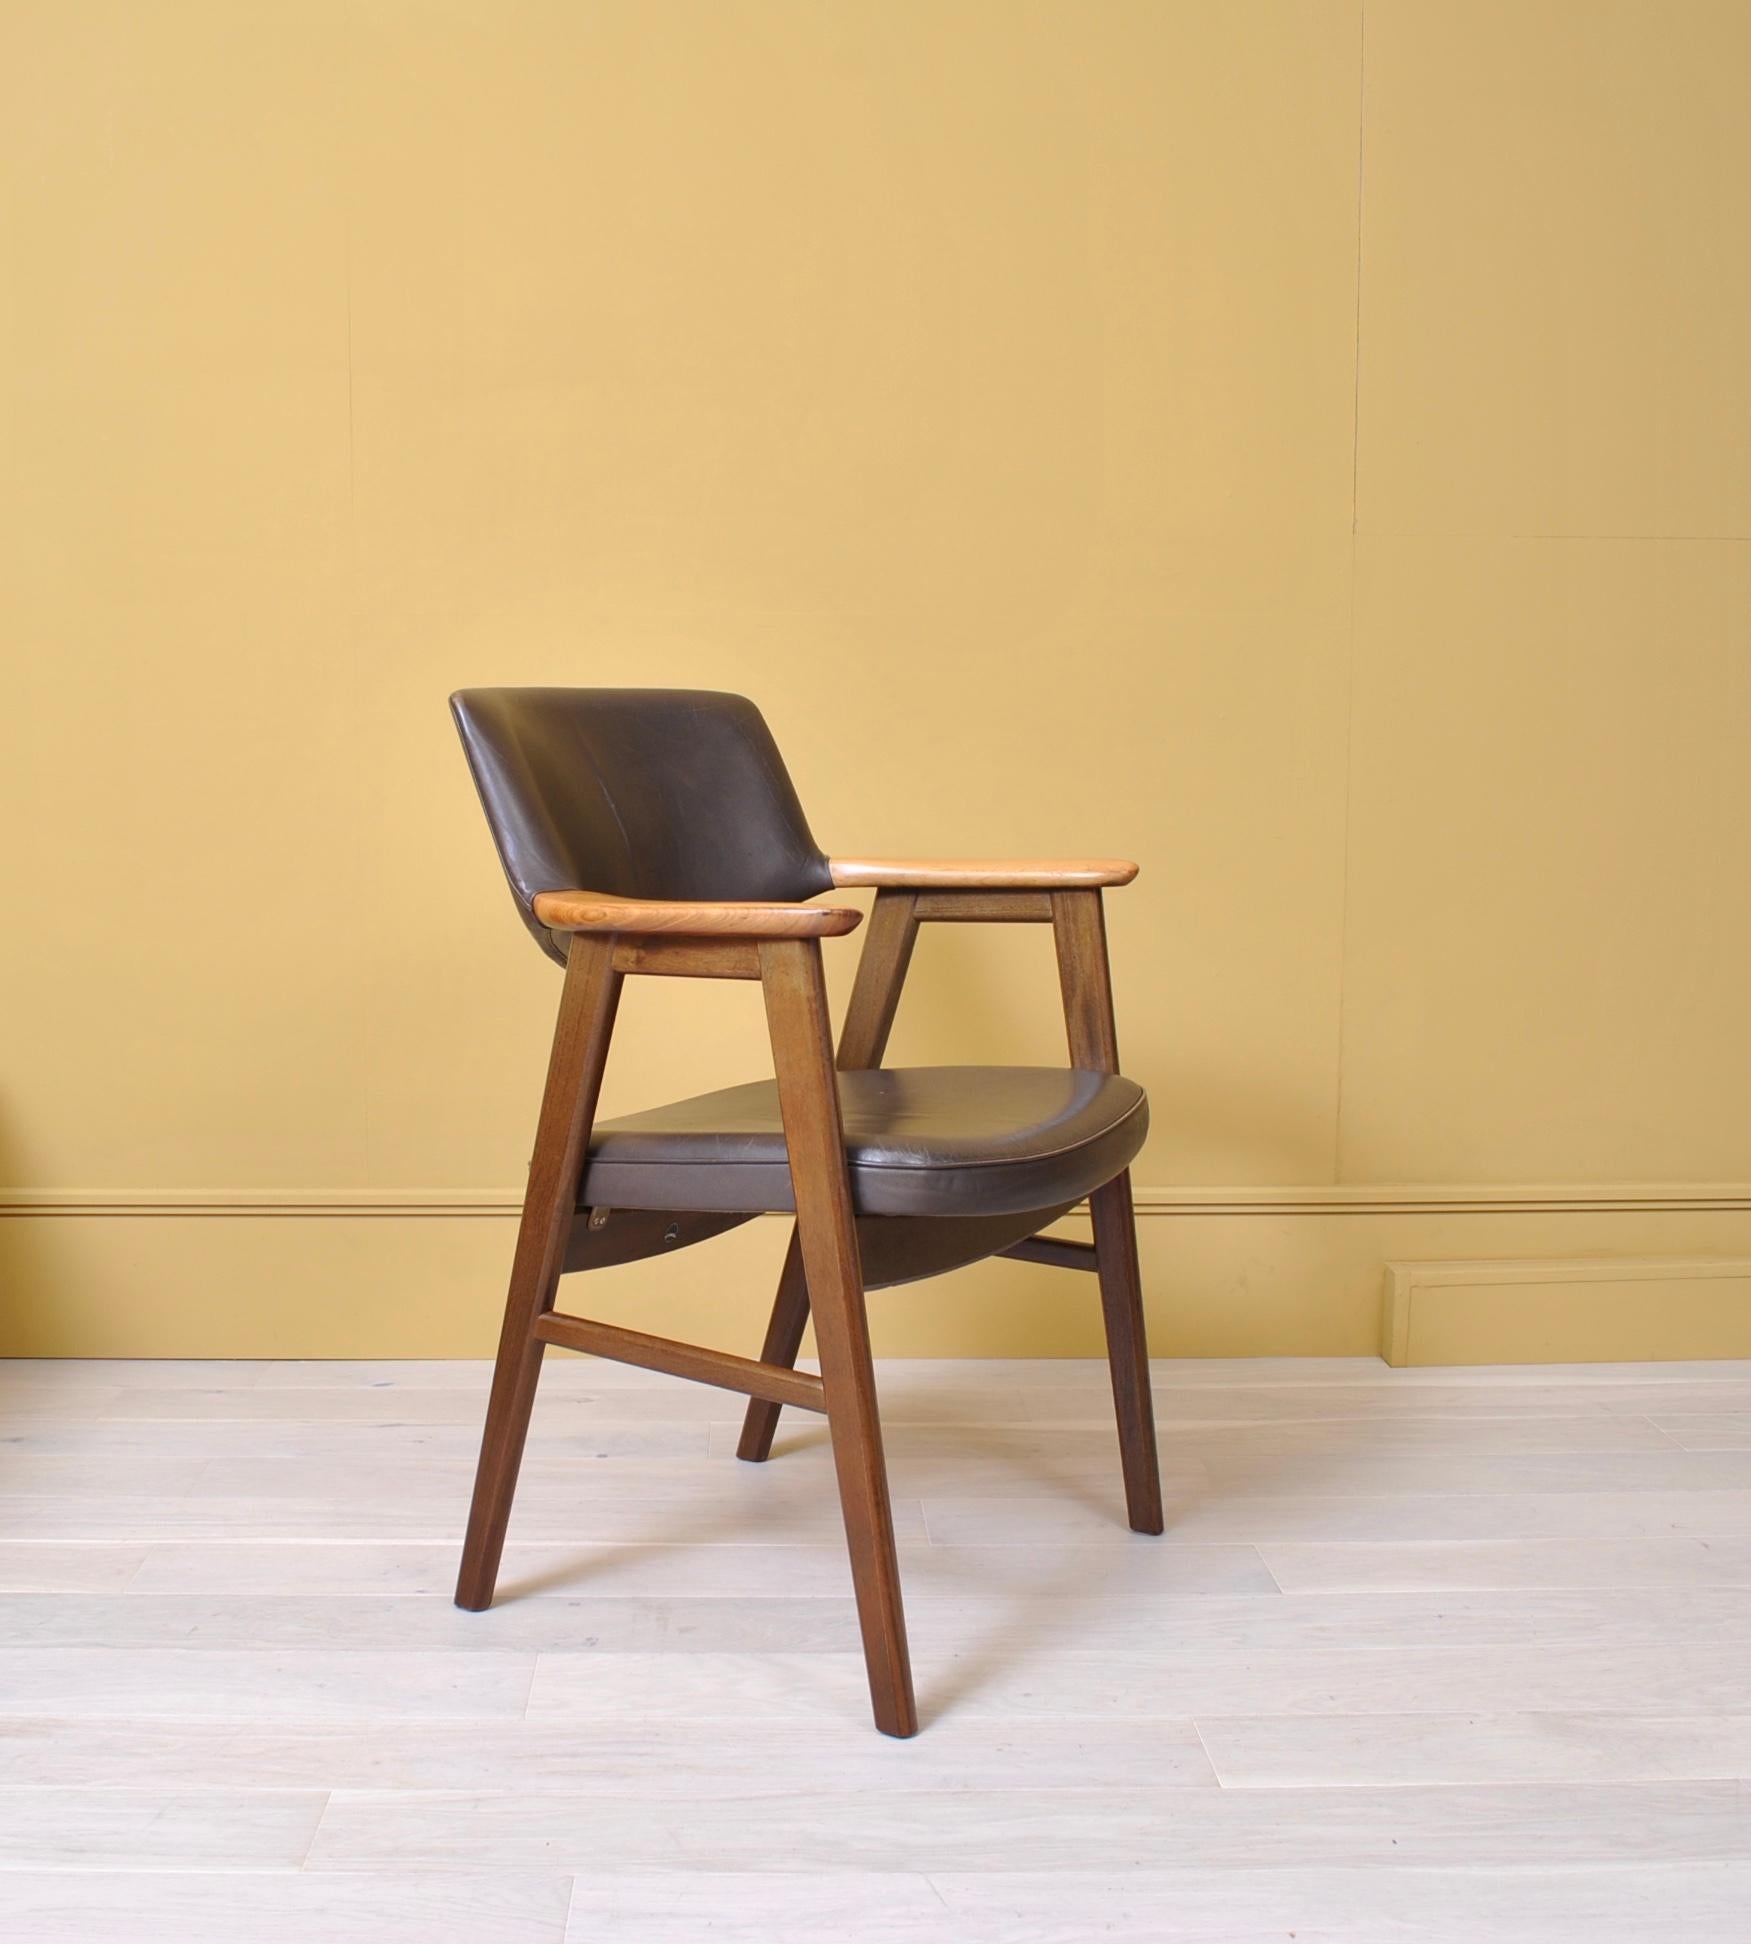 The Erik Kirkegaard desk chair is possibly the most comfortable chair of its kind that we’ve encountered over the years. The curves and angles hold and support the body extremely well. These robust chairs have walnut frames and original dark brown